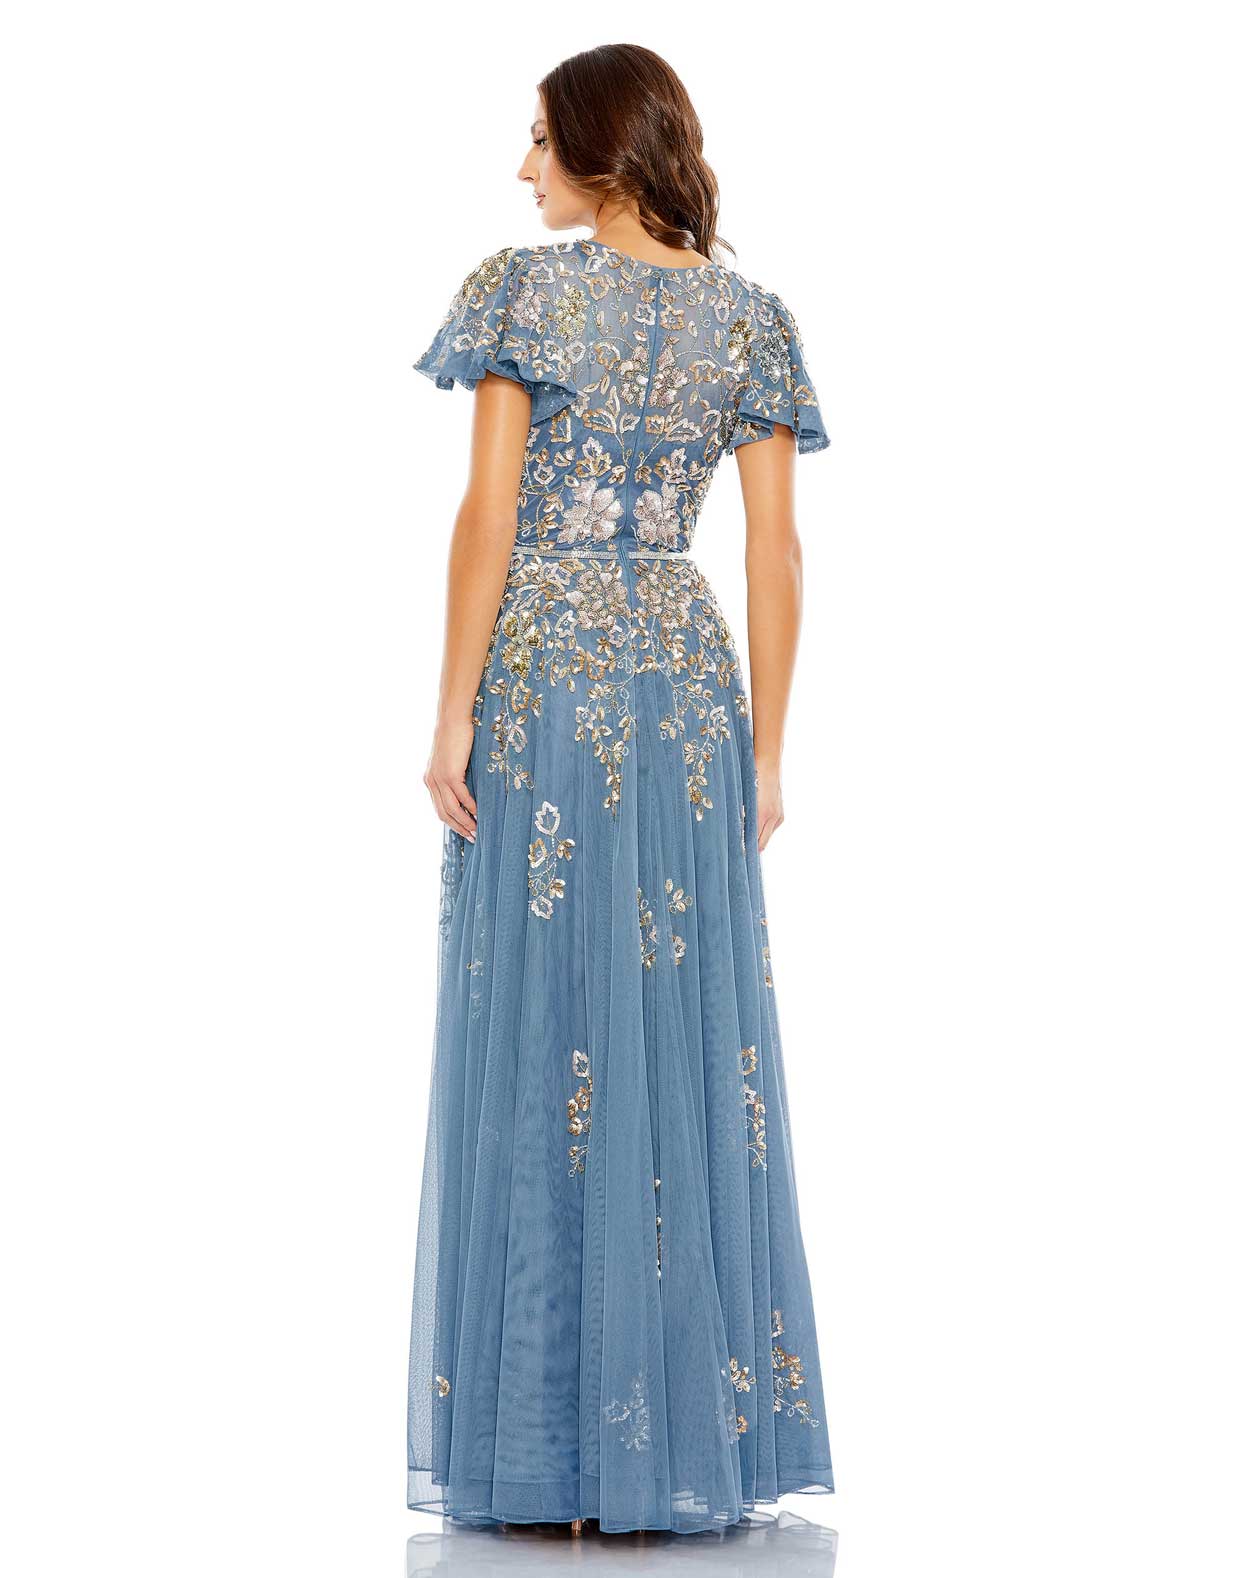 Embellished Butterfly Sleeve High Neck Gown